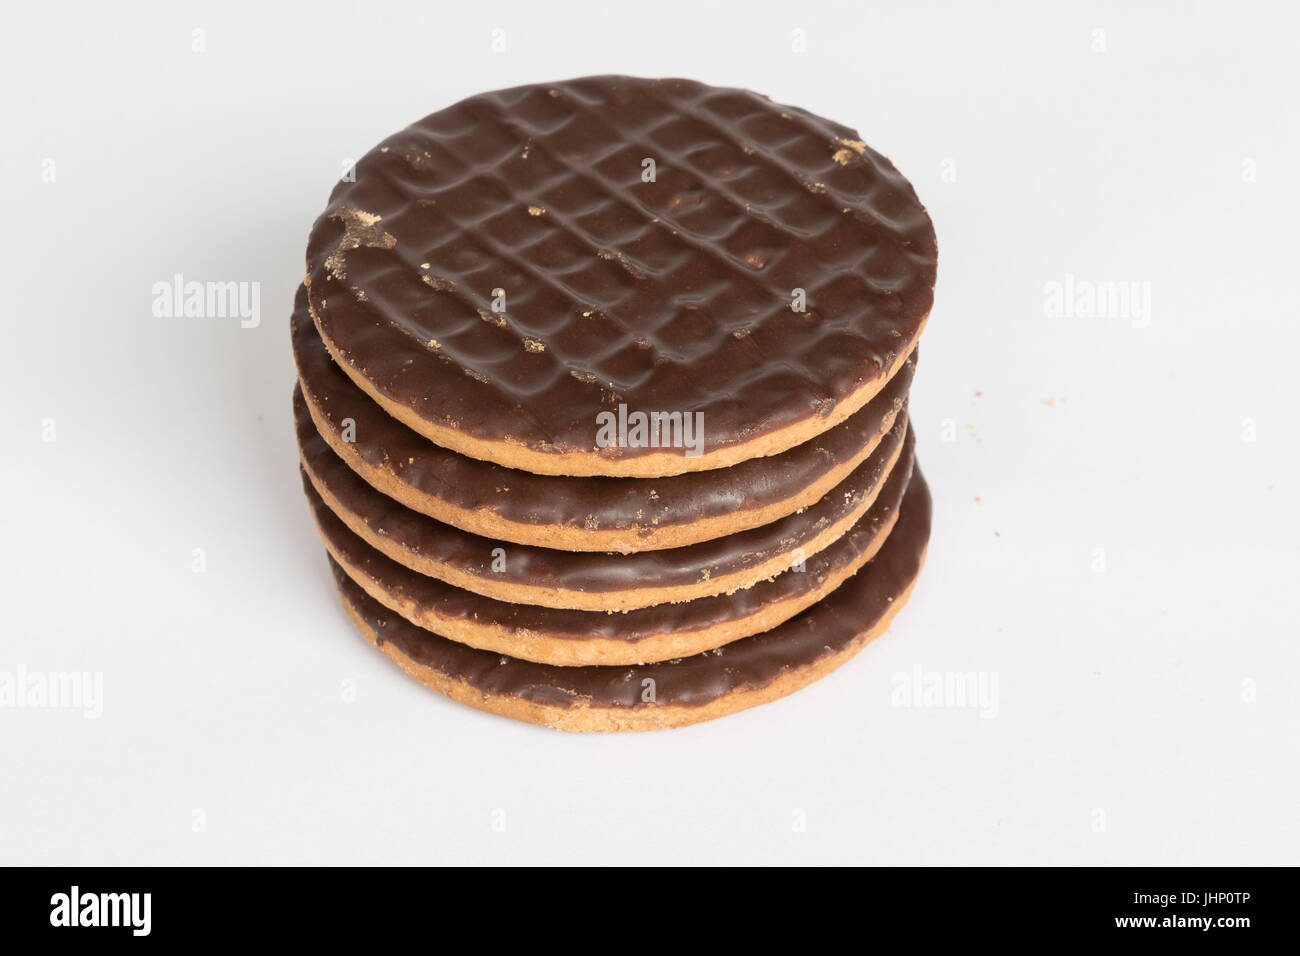 Plain Chocolate digestive biscuits isolated on a white background Stock Photo